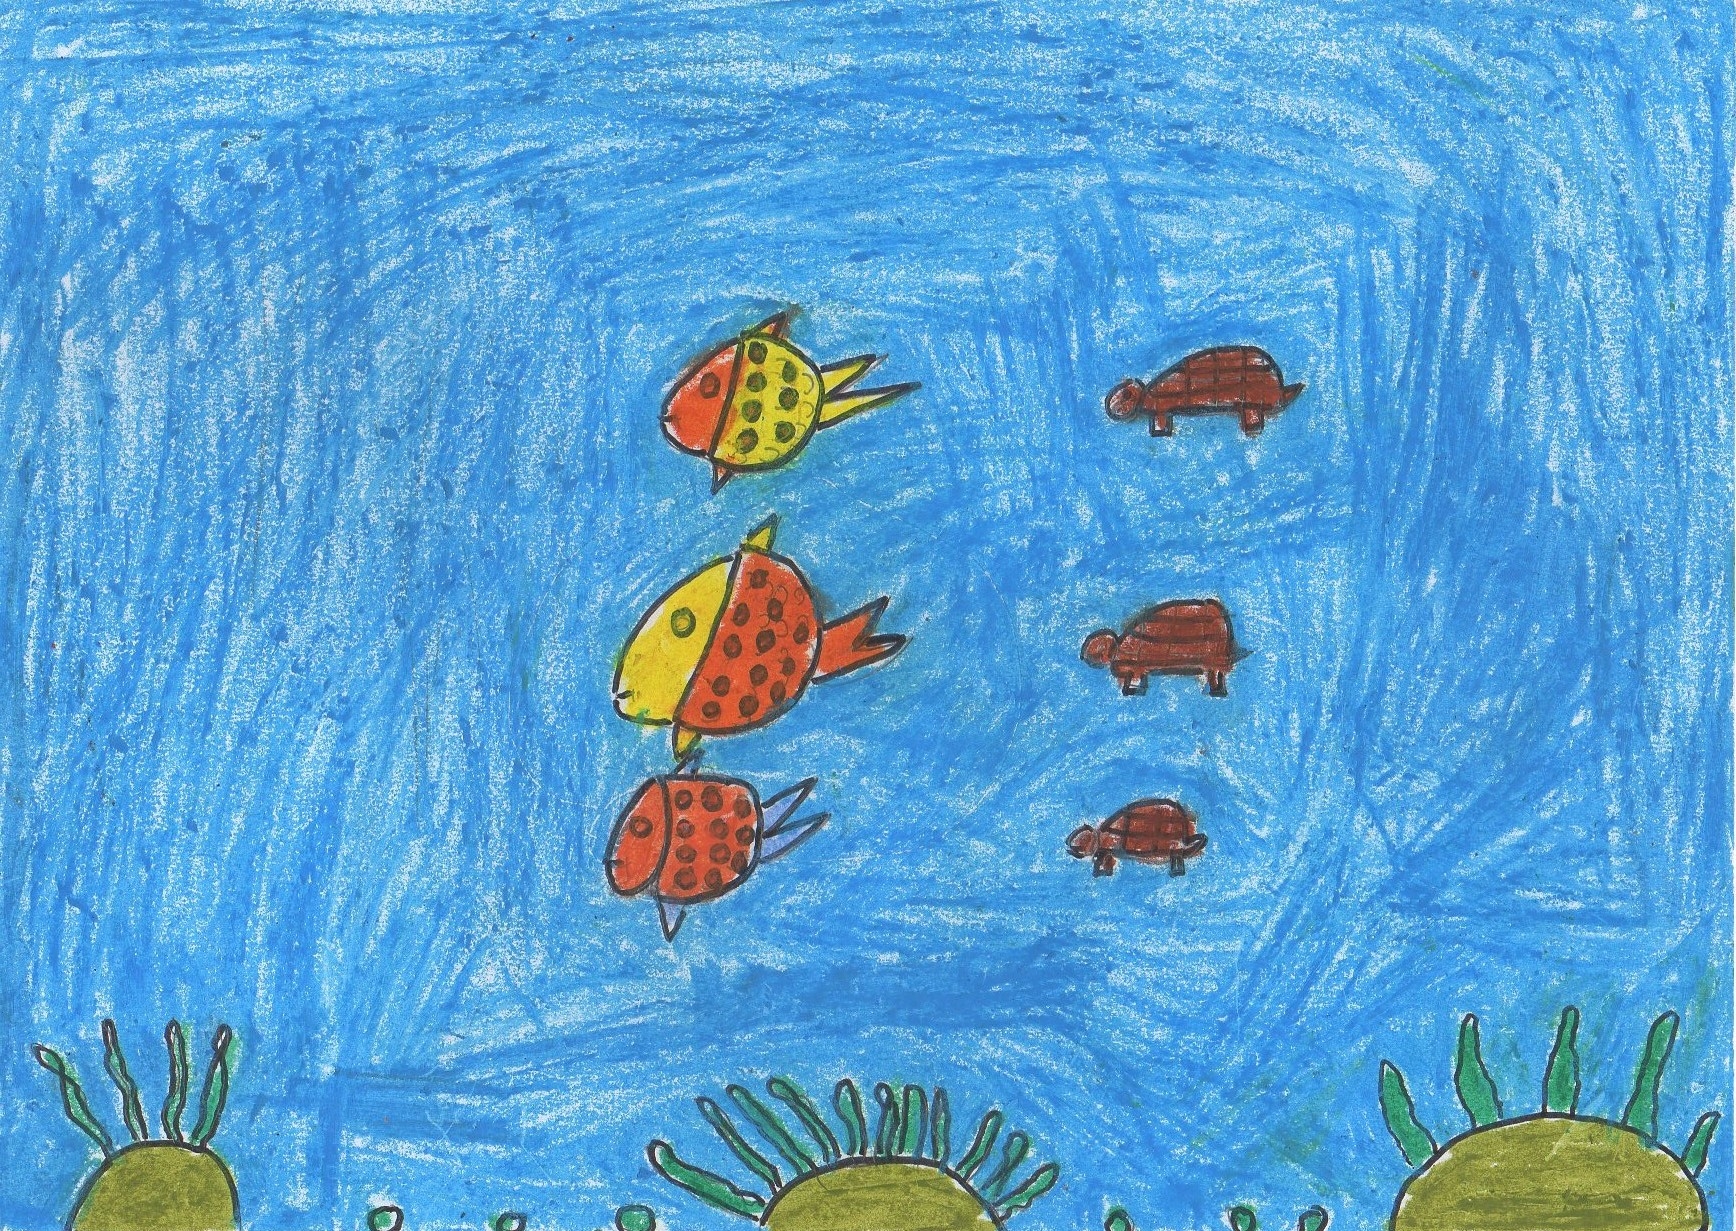 The Fish Jumps Into the Pond. | Art drawings for kids, Scenery drawing for  kids, Easy drawings for kids